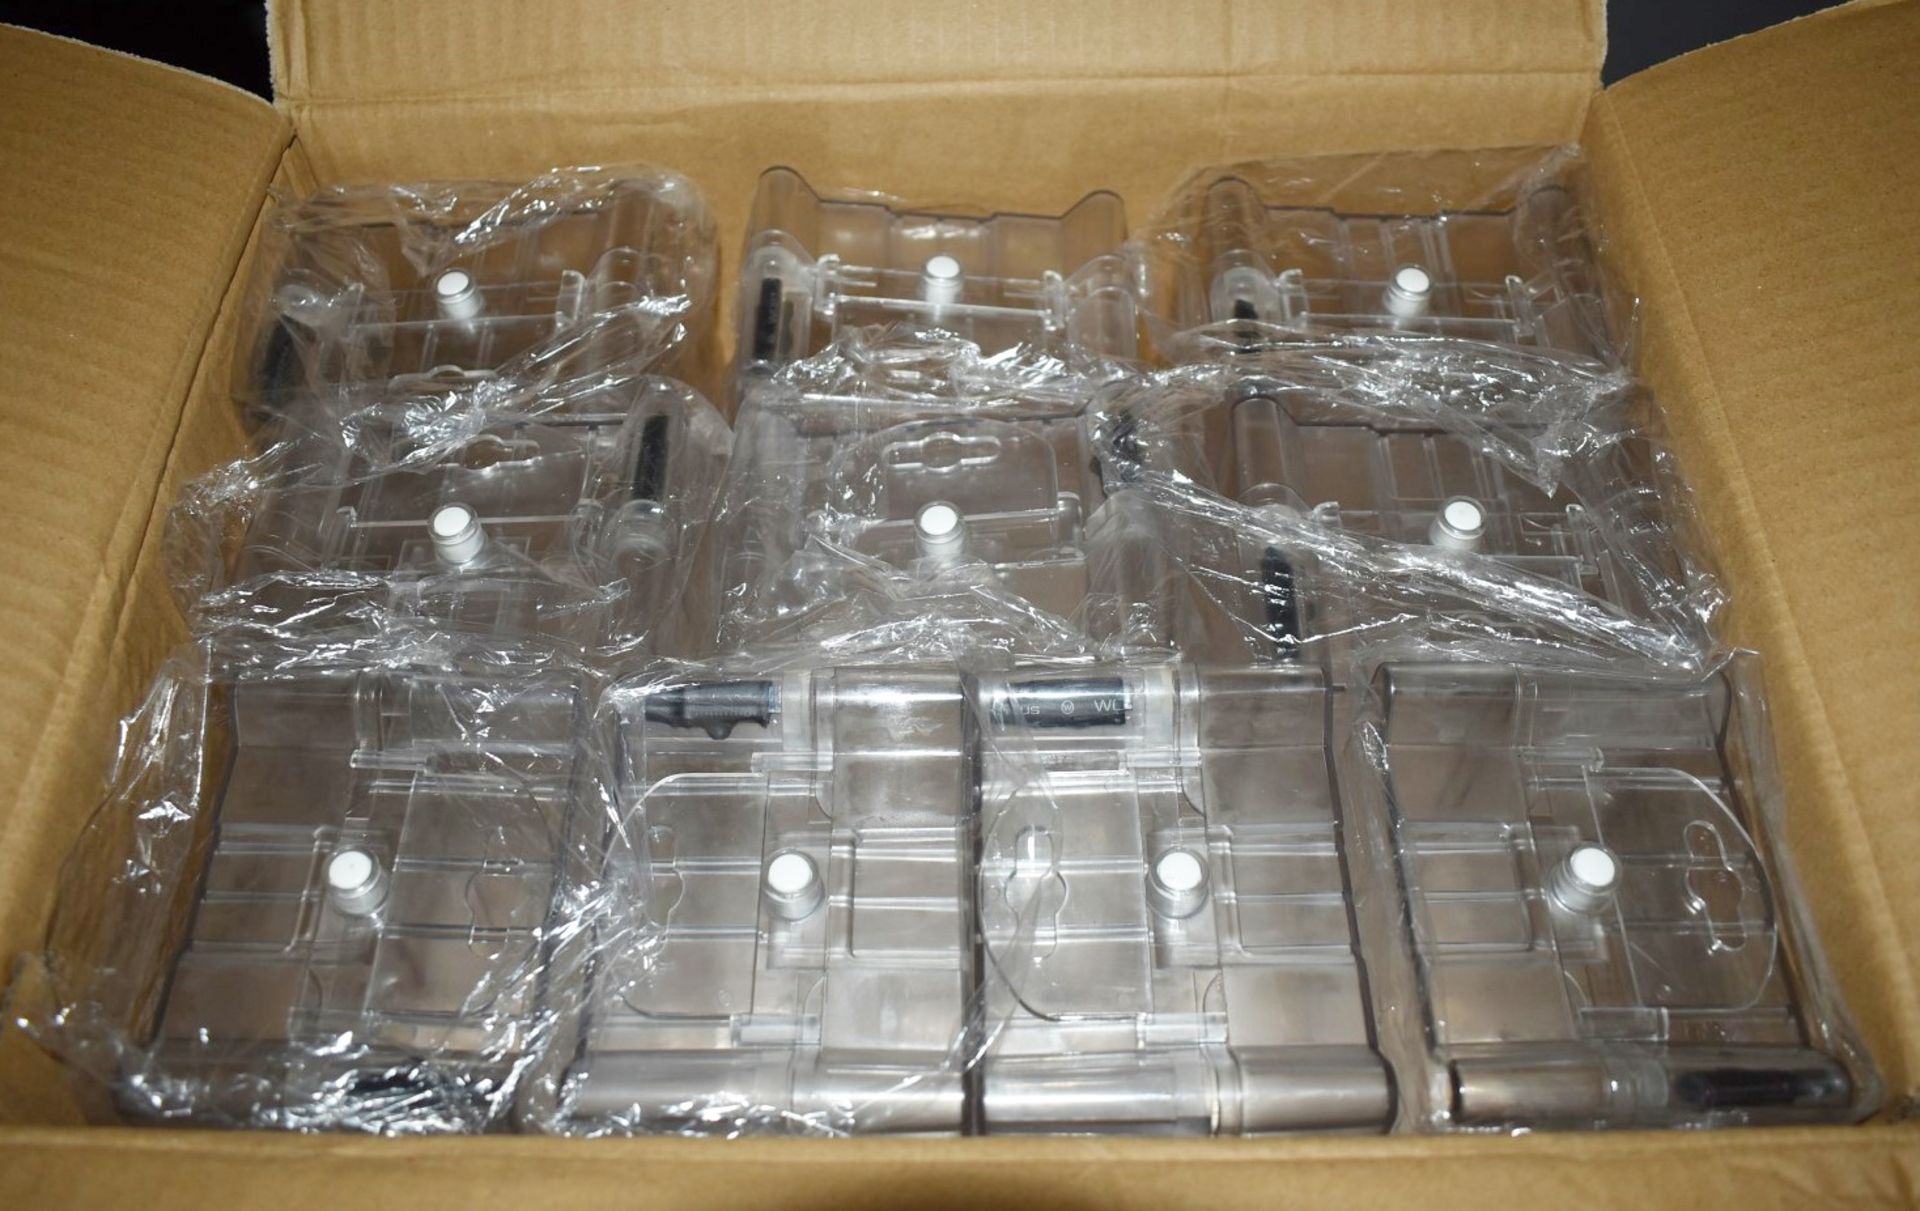 40 x Catalyst Clear Acrylic Retail Security Safer Cases With RF Tags and Hanging Tags - Brand New - Image 5 of 8